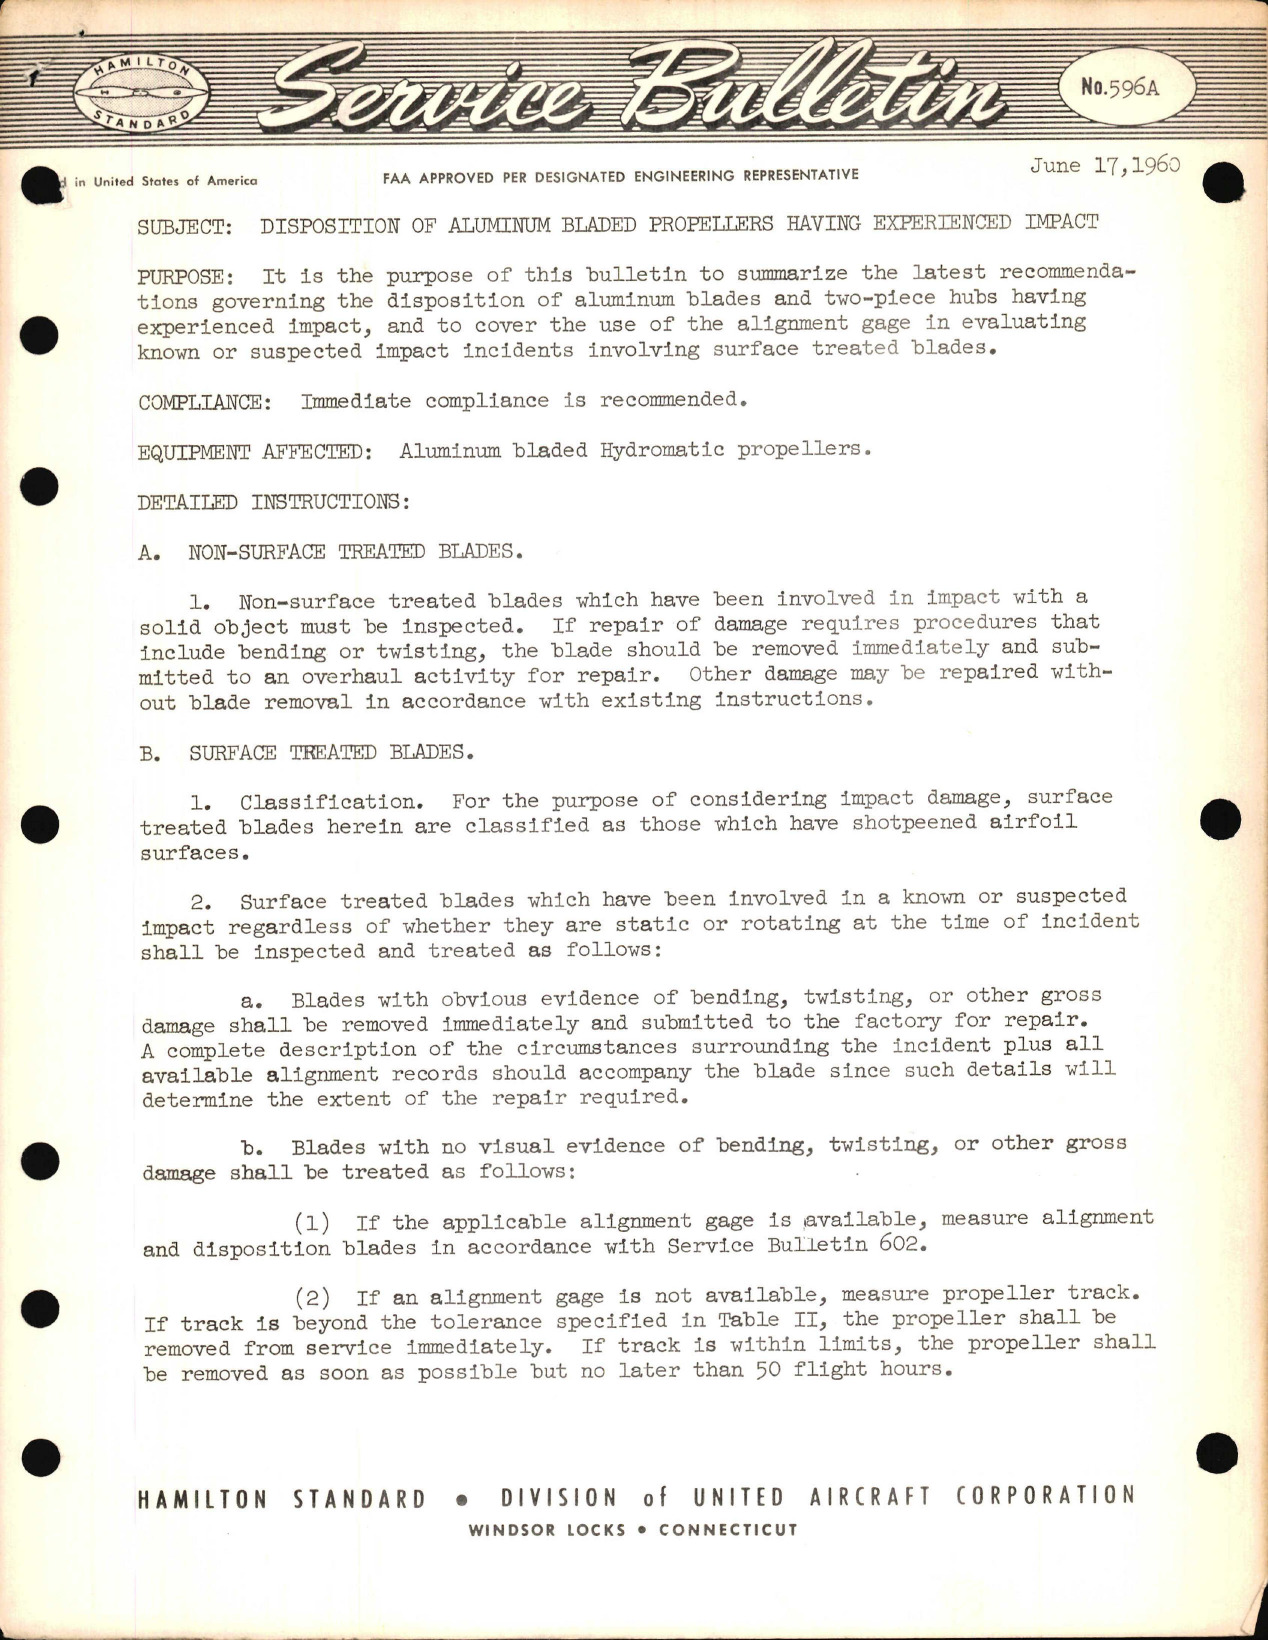 Sample page 1 from AirCorps Library document: Disposition of Aluminum Bladed Propellers Having Experienced Impact